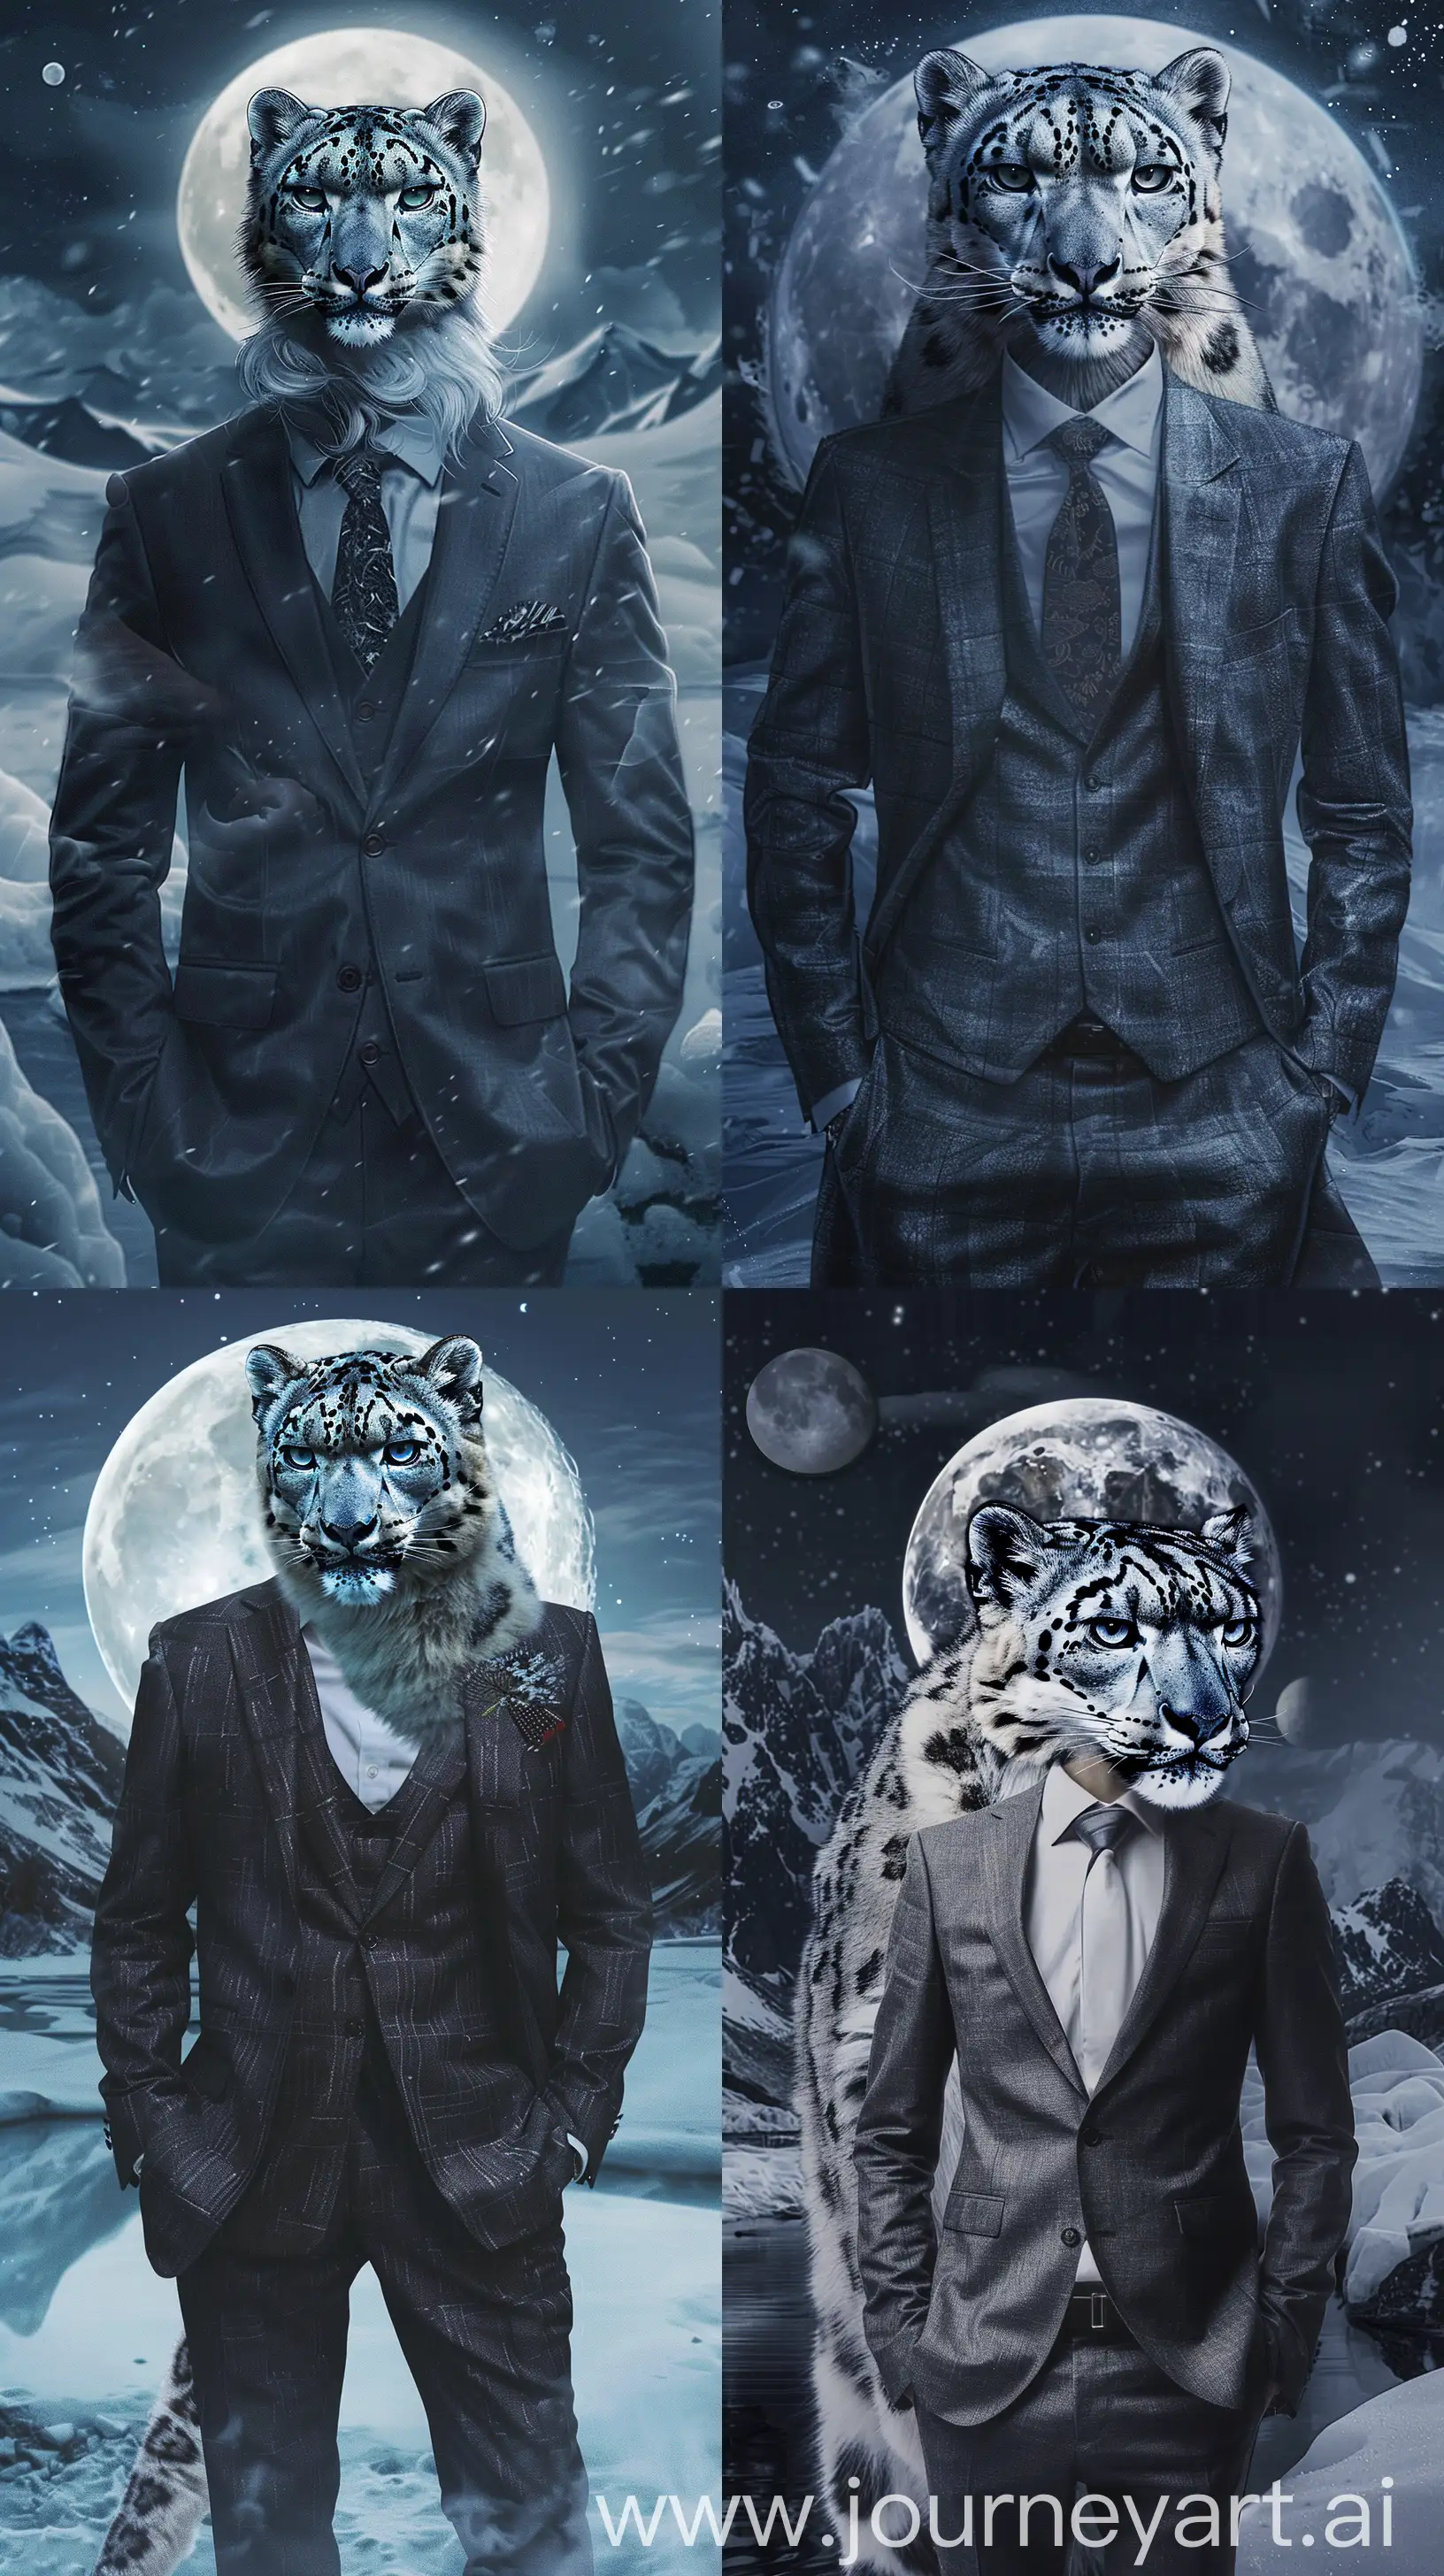 Create an intriguing phone wallpaper in the style of Charles Blackman, depicting a snow leopard anthropomorphized into a man wearing a suit. This character should exude an air of mystery and grace, with Blackman's characteristic fluid lines and a backdrop of a snowy, moonlit landscape that reflects the leopard's natural habitat. The artwork should blend realism with a touch of the surreal, capturing the elegance of the snow leopard in a humanized portrayal.` --ar 9:16